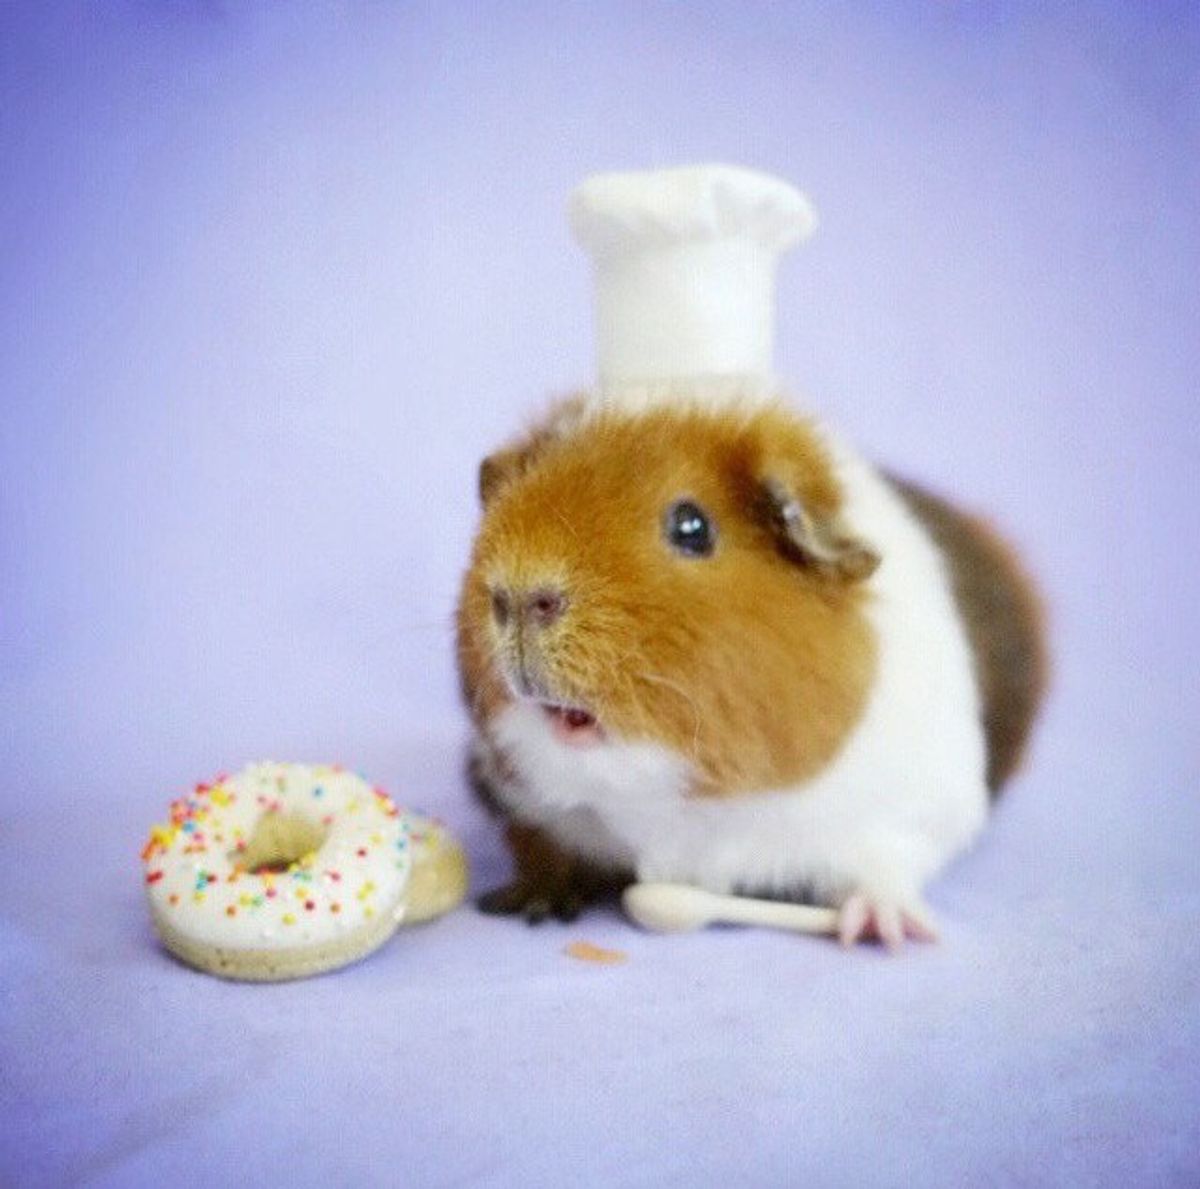 11 Reasons Guinea Pigs Are Adorable